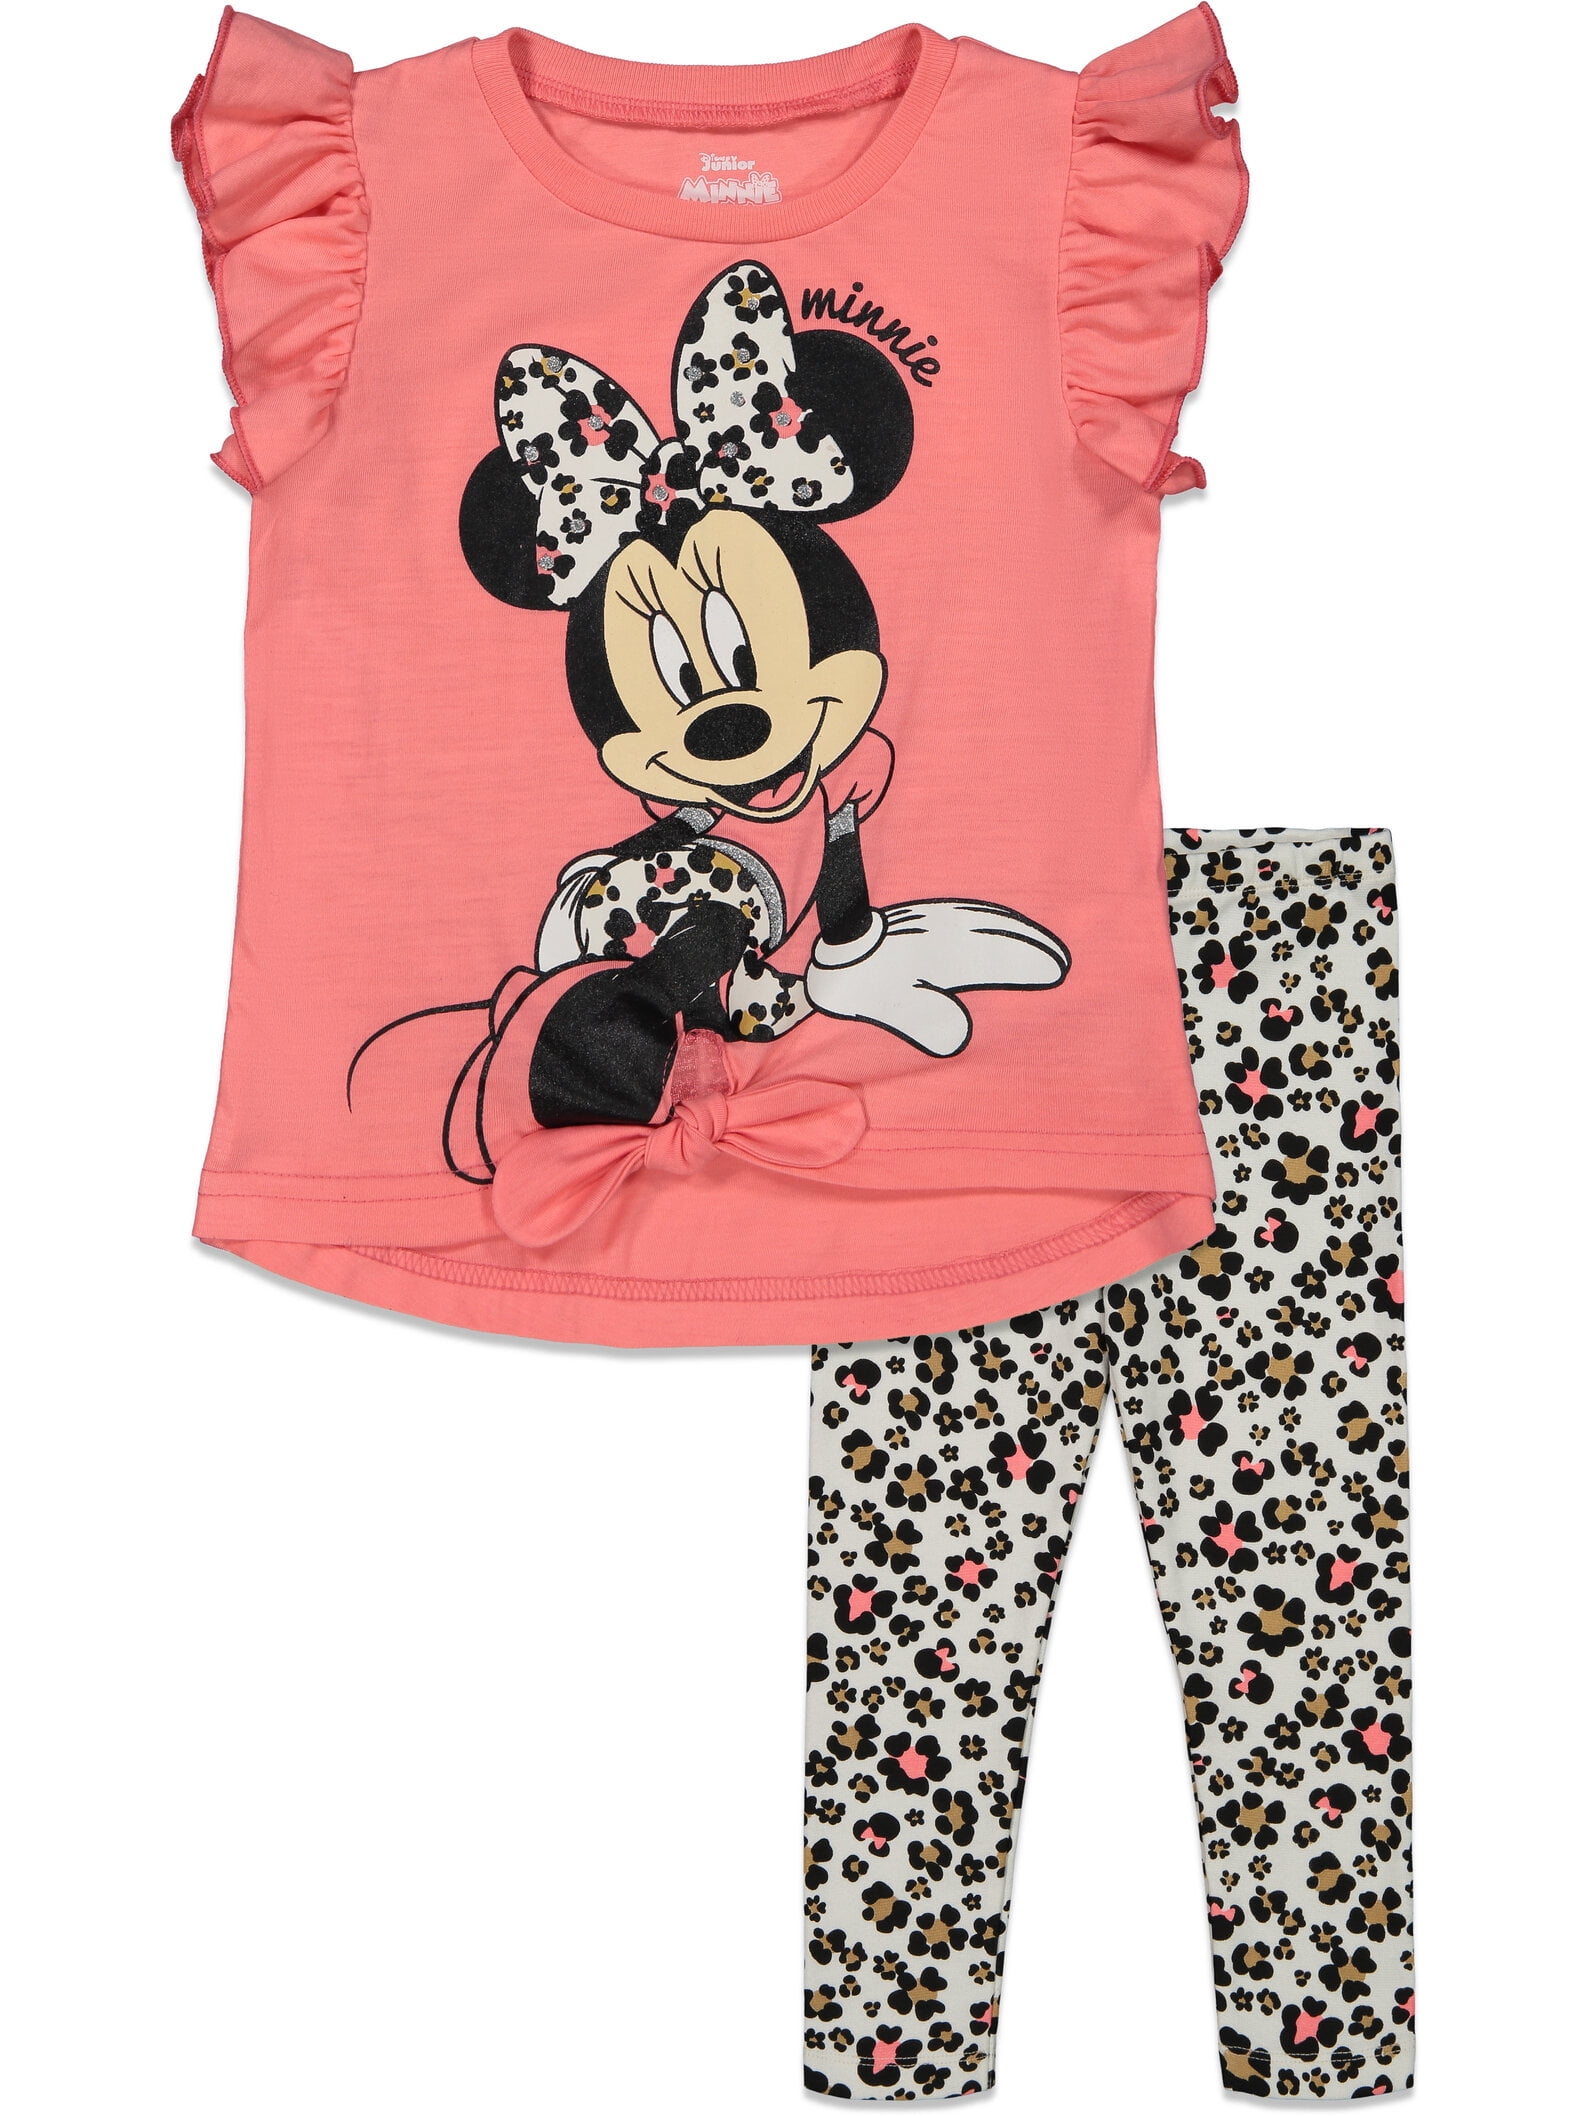 Disney Minnie Mouse Little Girls Knotted Fashion Graphic T-Shirt and Leggings Outfit Set Dark Pink 7-8